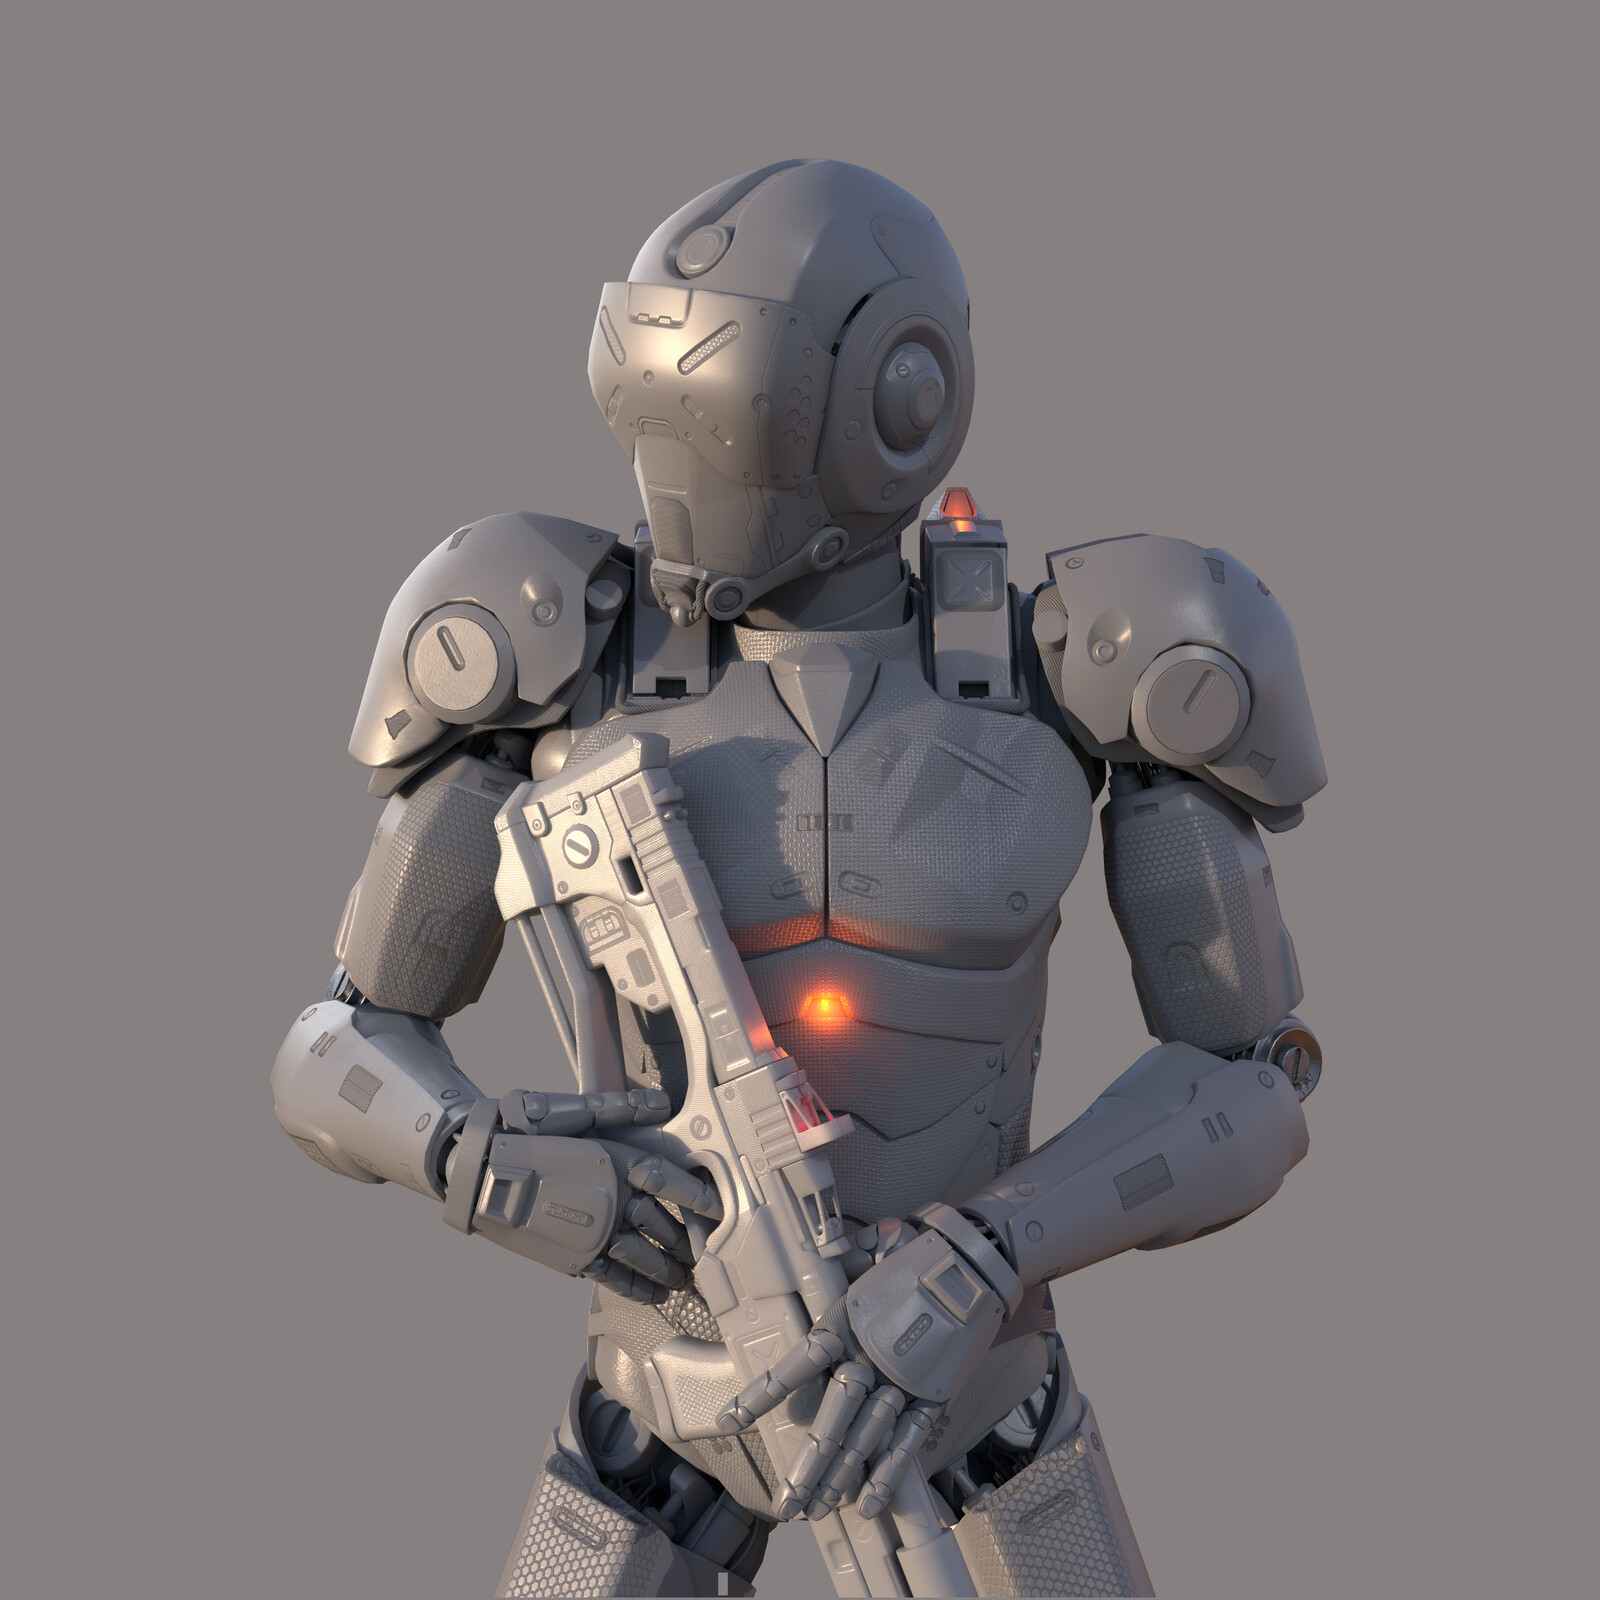 android squad. 3d cg character for my upcoming short film. modeled in maya, textured in substance painter and rendered by arnold.